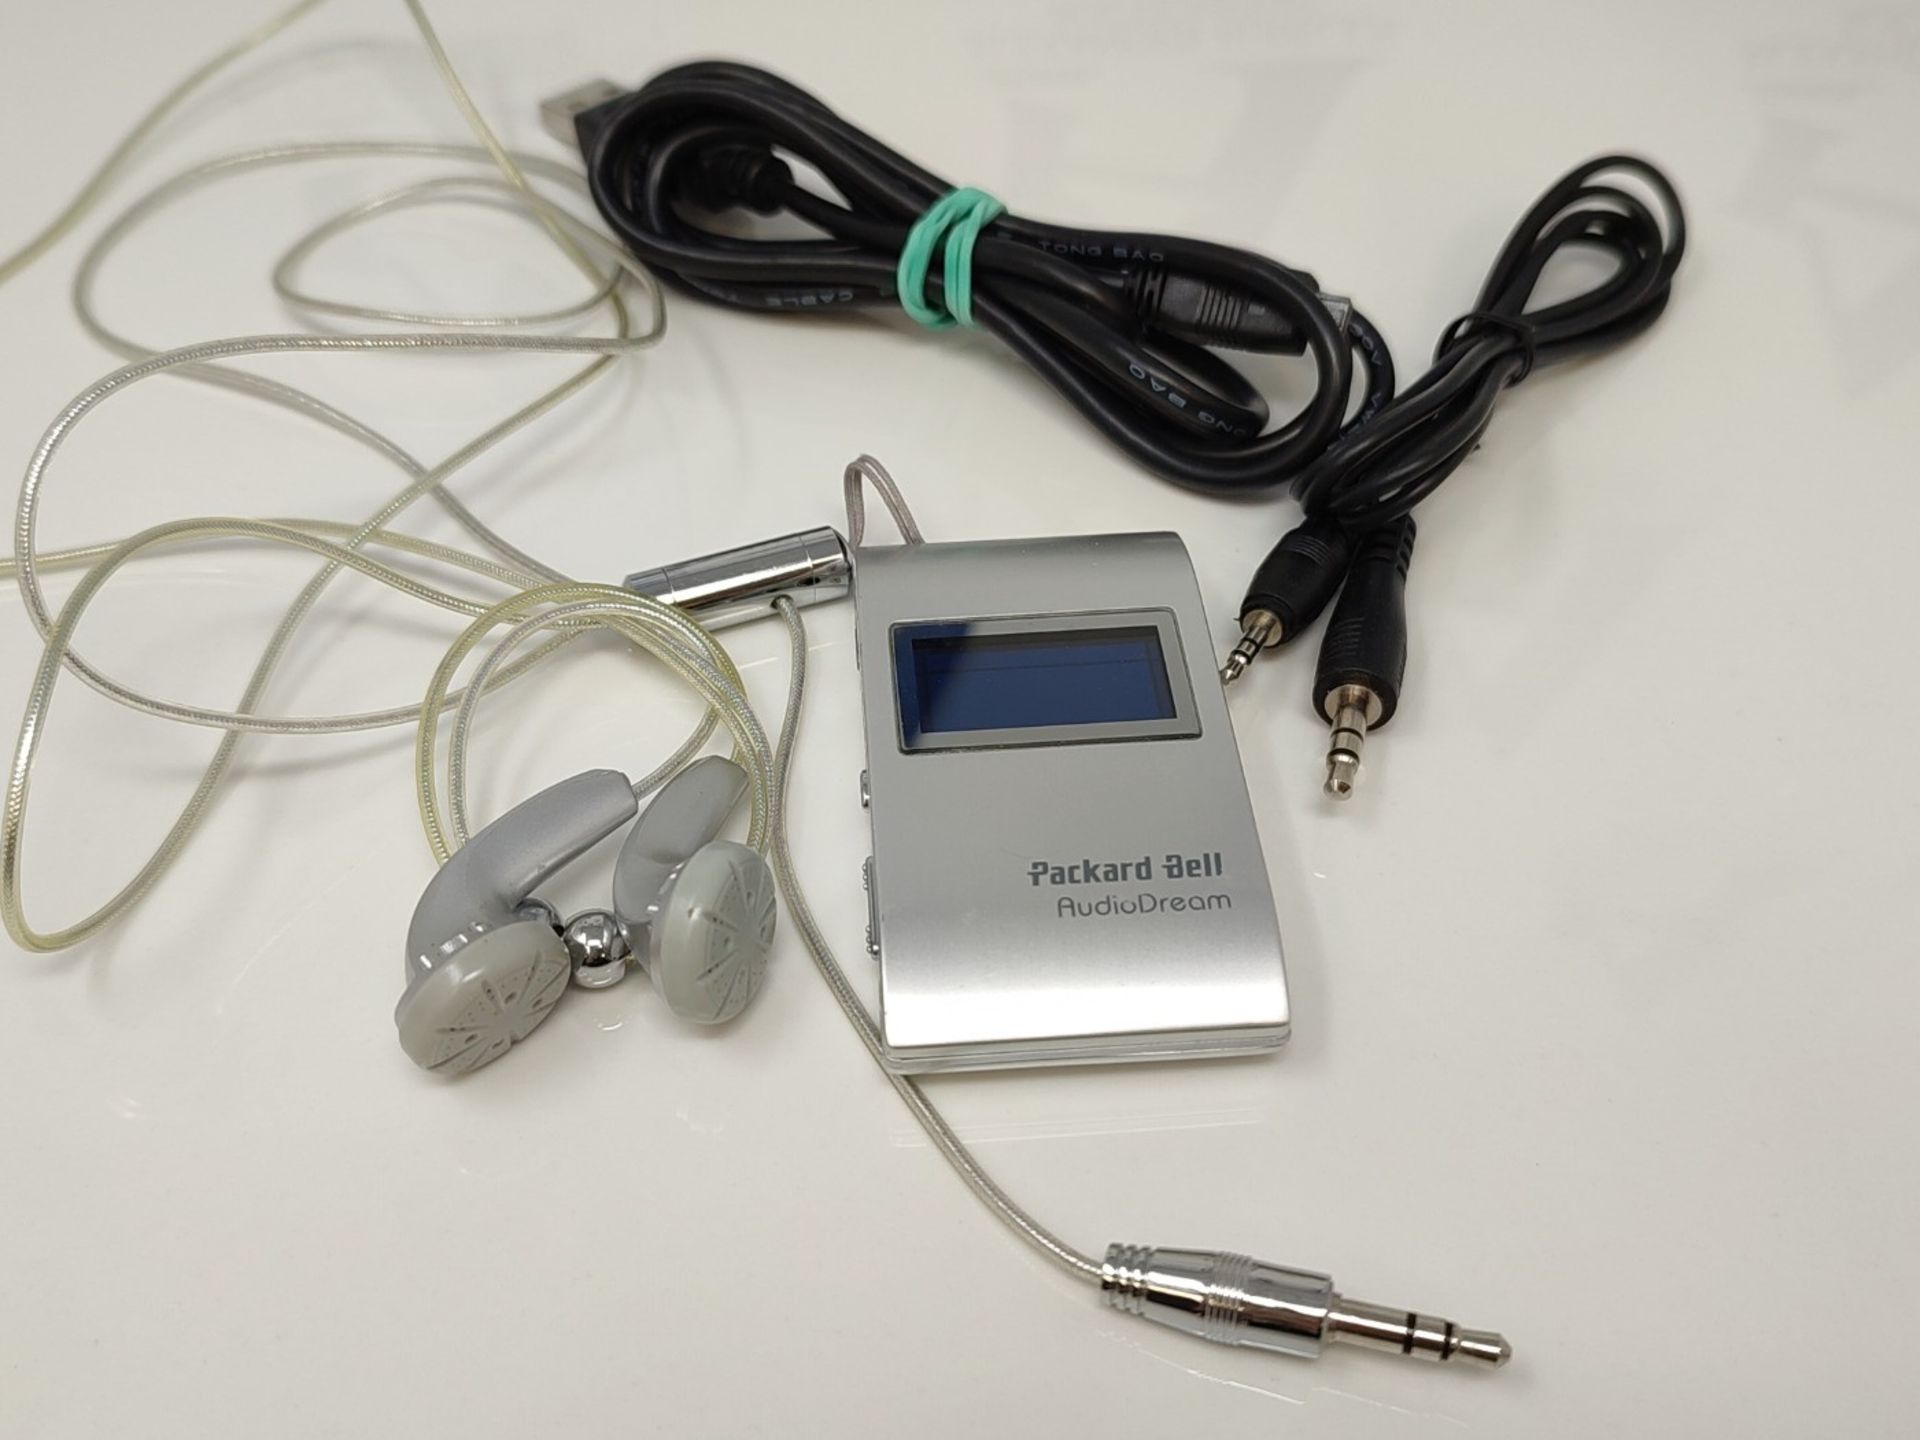 Packard Bell AudioDream MP3 player - Image 2 of 2